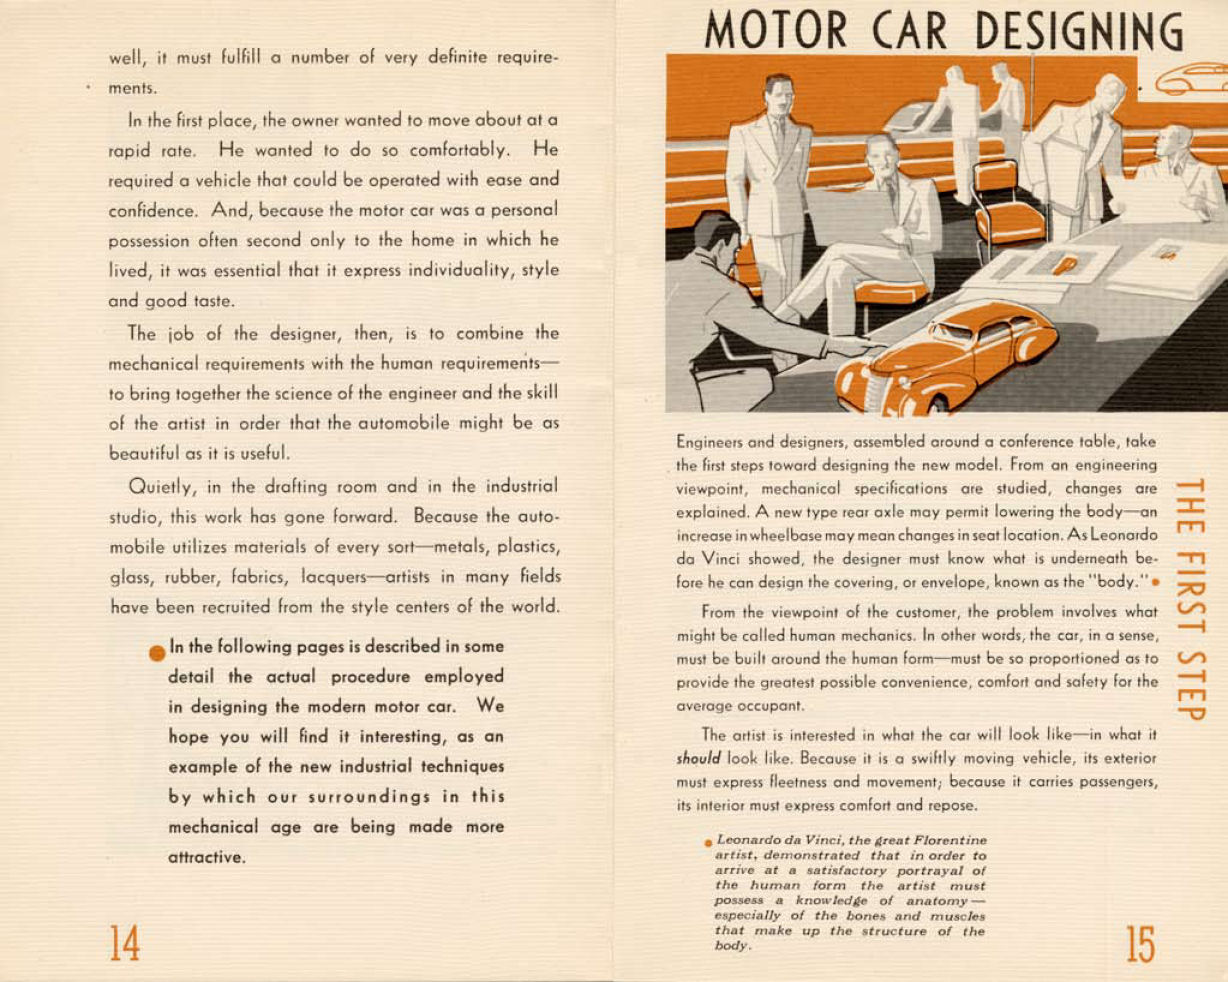 1938-Modes_and_Motors-14-15